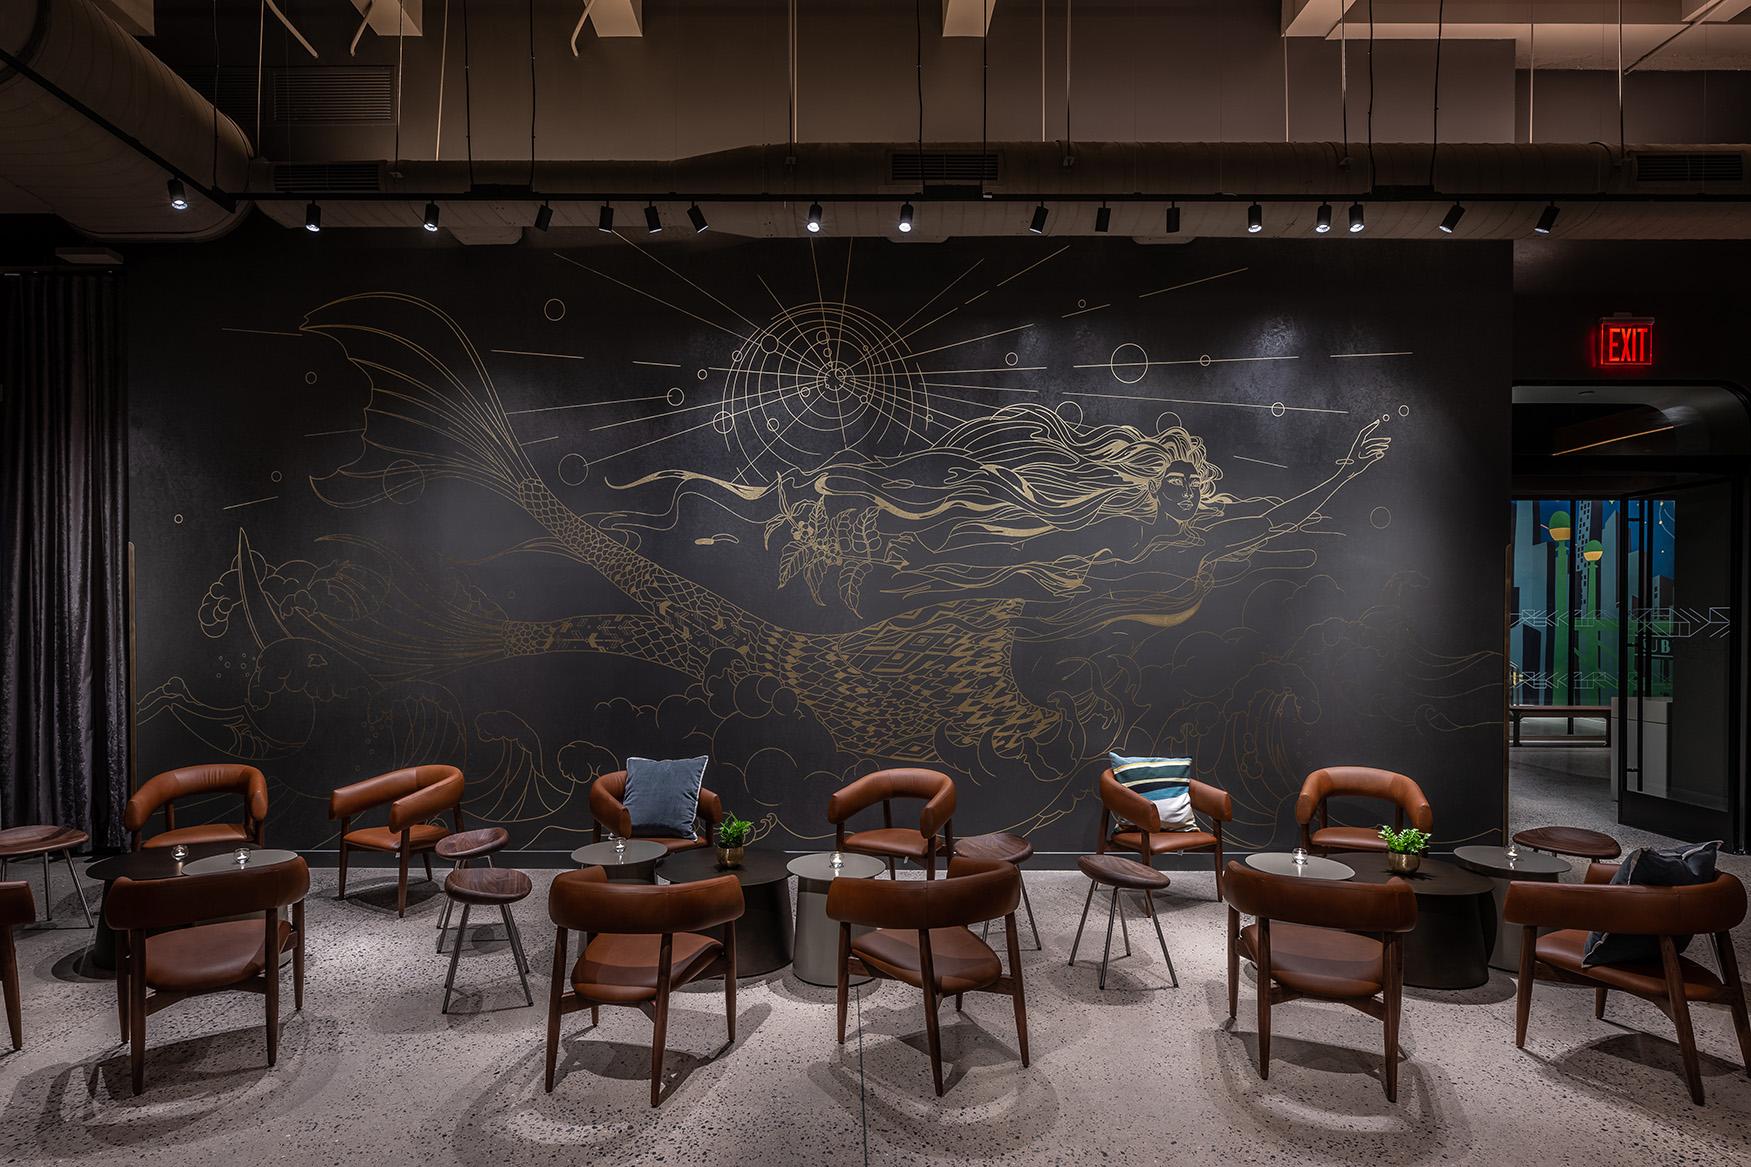 Empire State Building's new Starbucks pays homage to Art Deco design